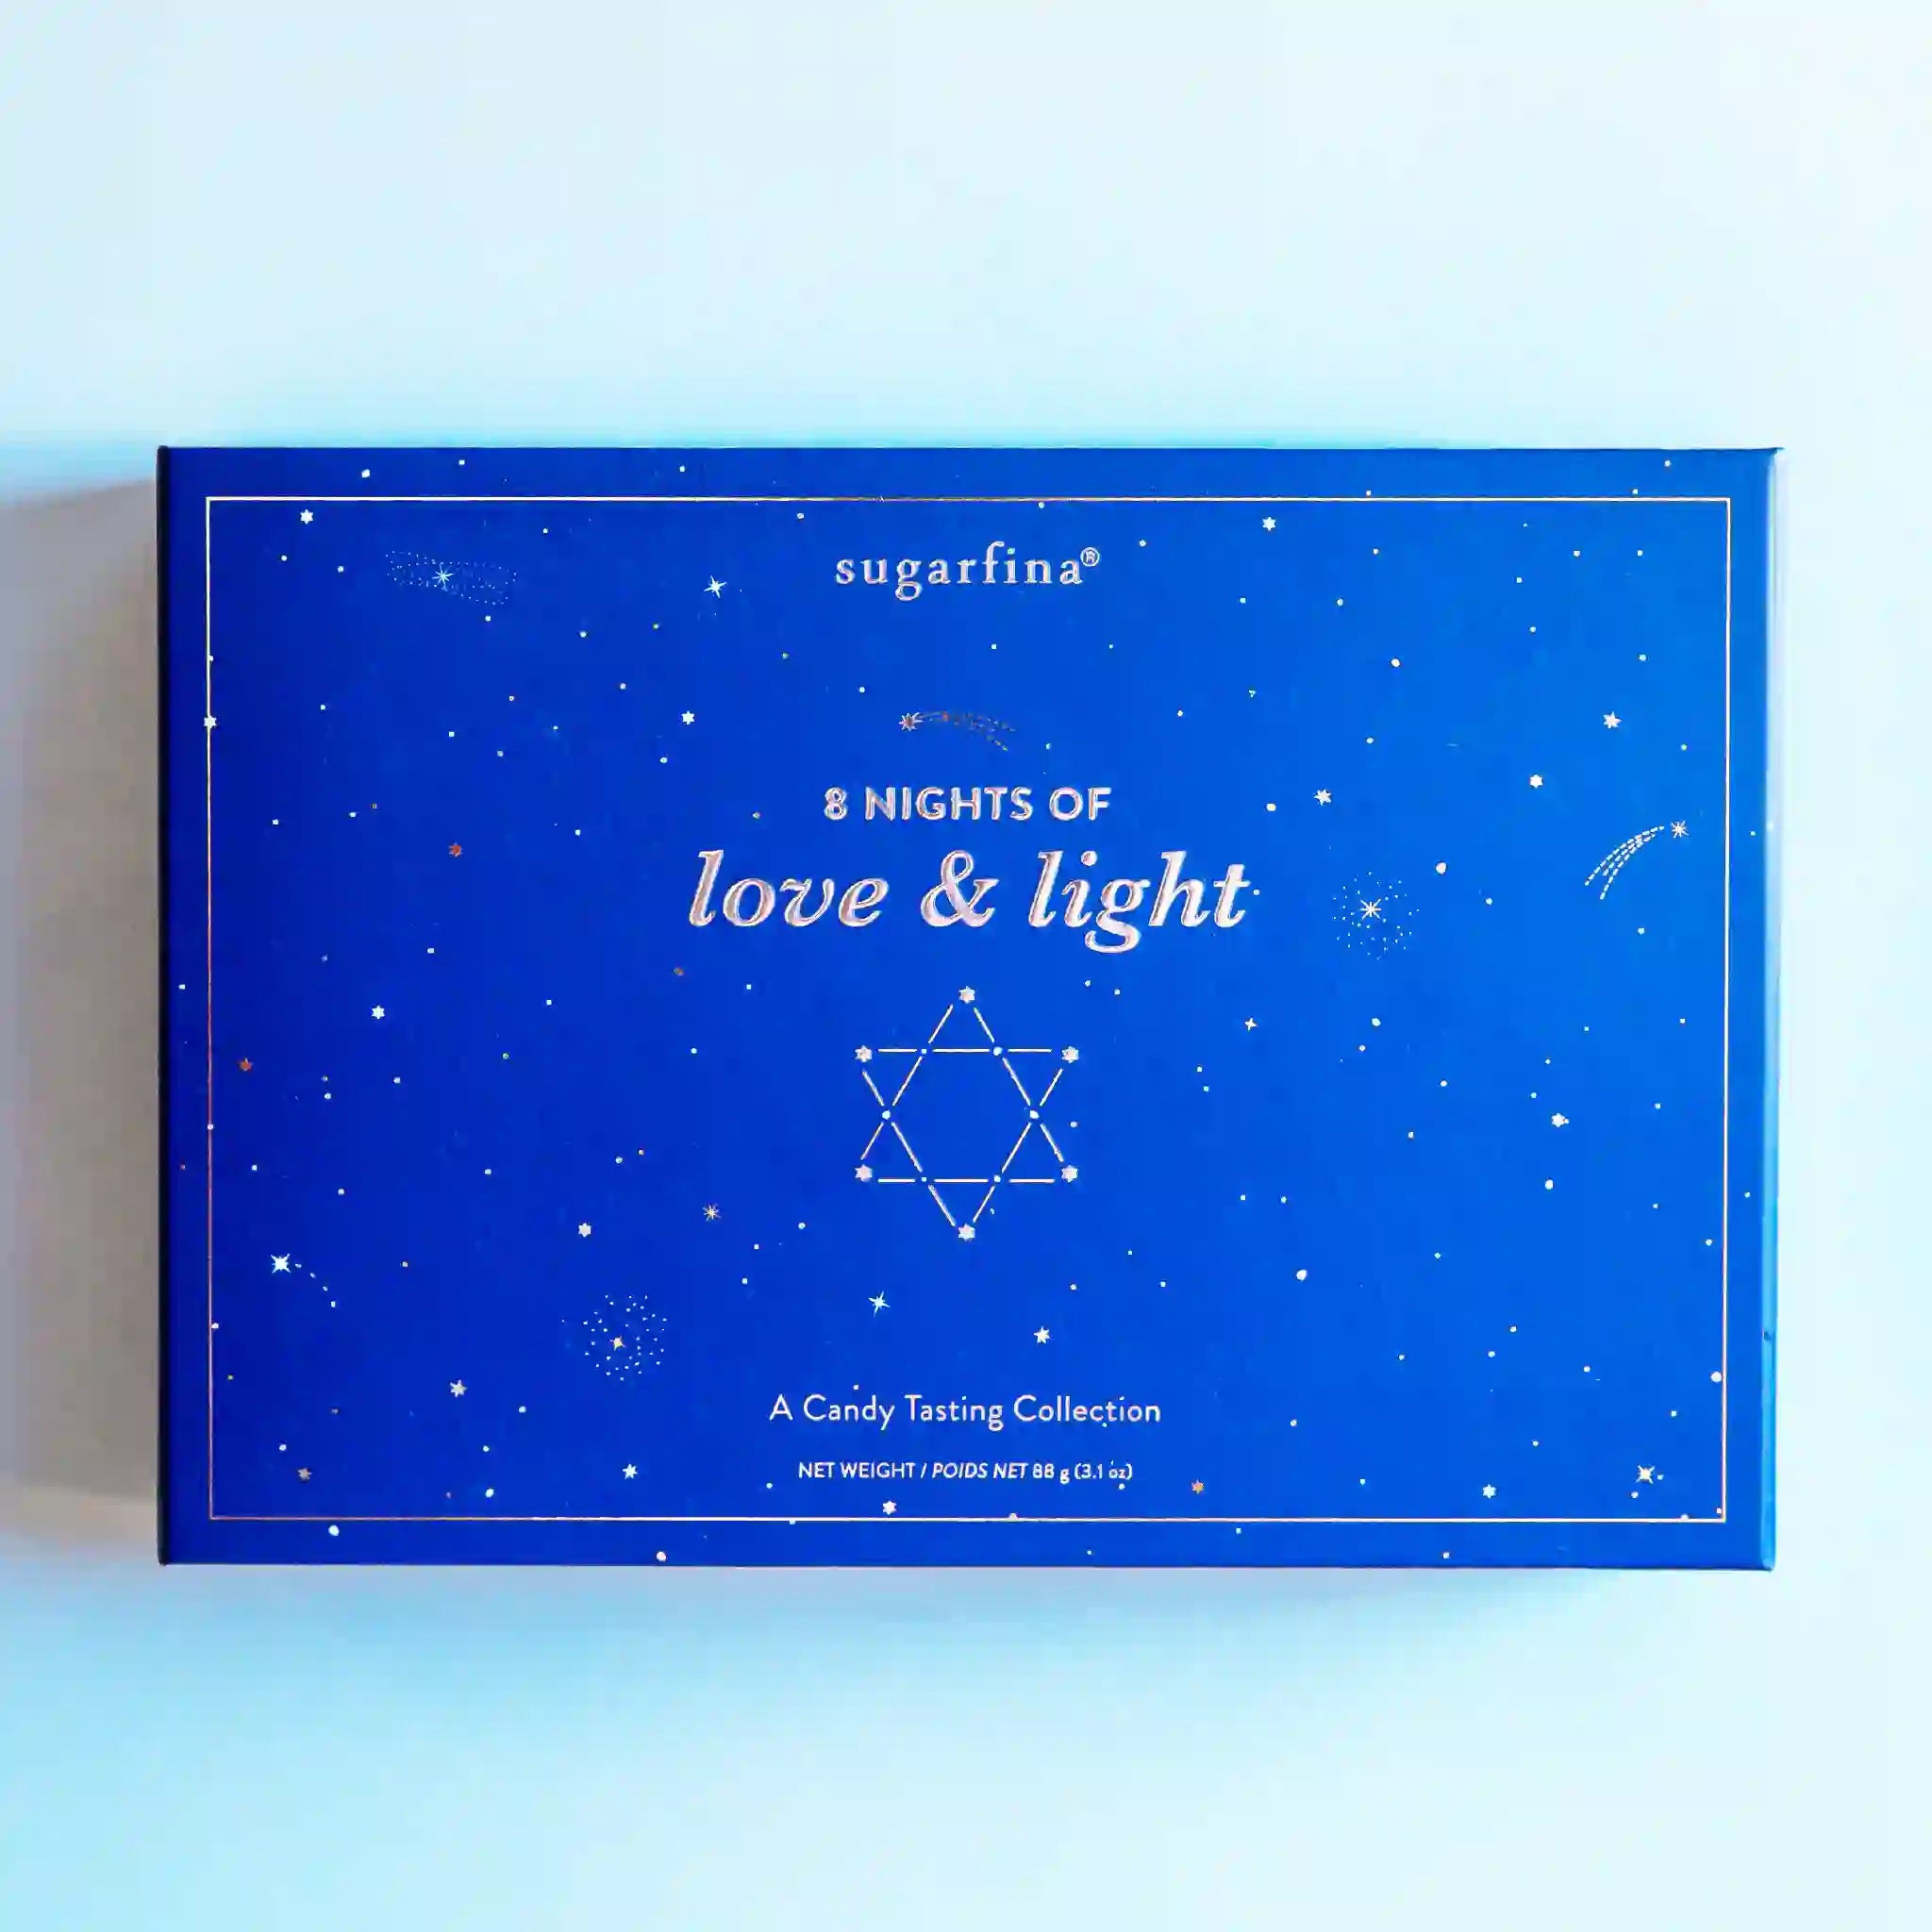 On a light blue background is a blue box filled with an assortment of chocolate and candies for each night of Hanukkah. The front of the box features silver details and text that reads, "8 Nights of love & light A Candy Tasting Collection".